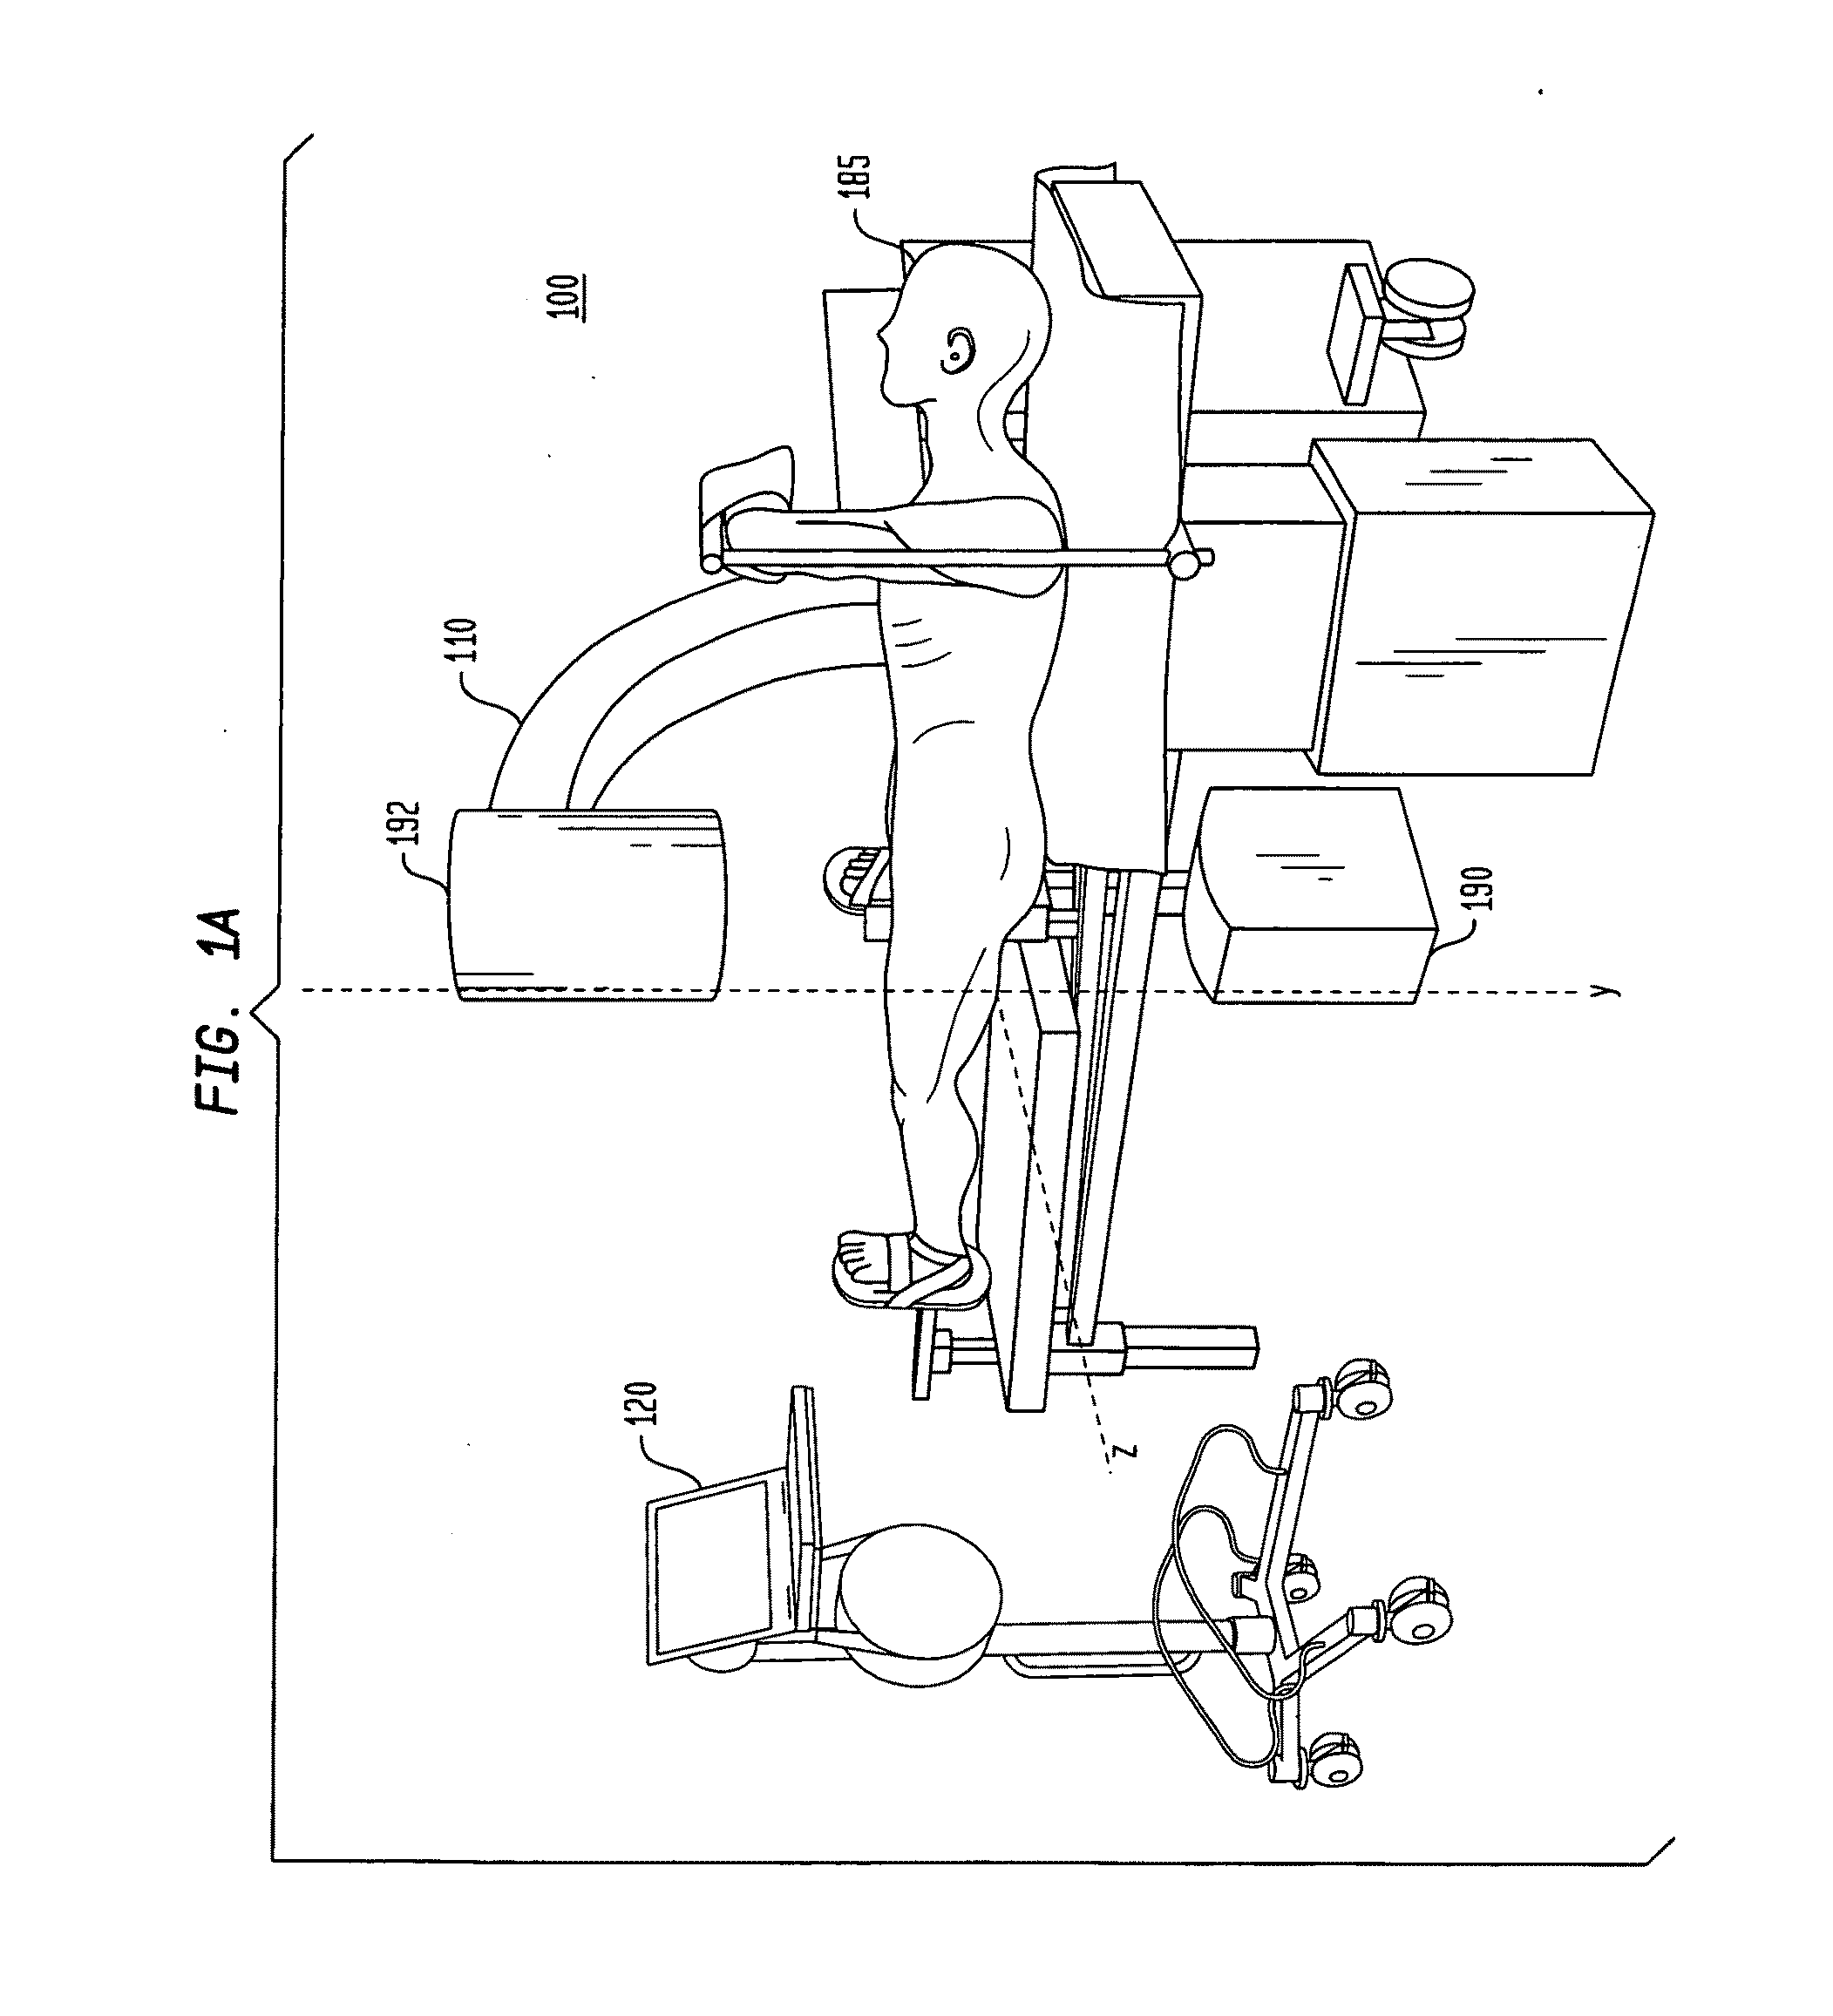 Stereotactic computer assisted surgery method and system